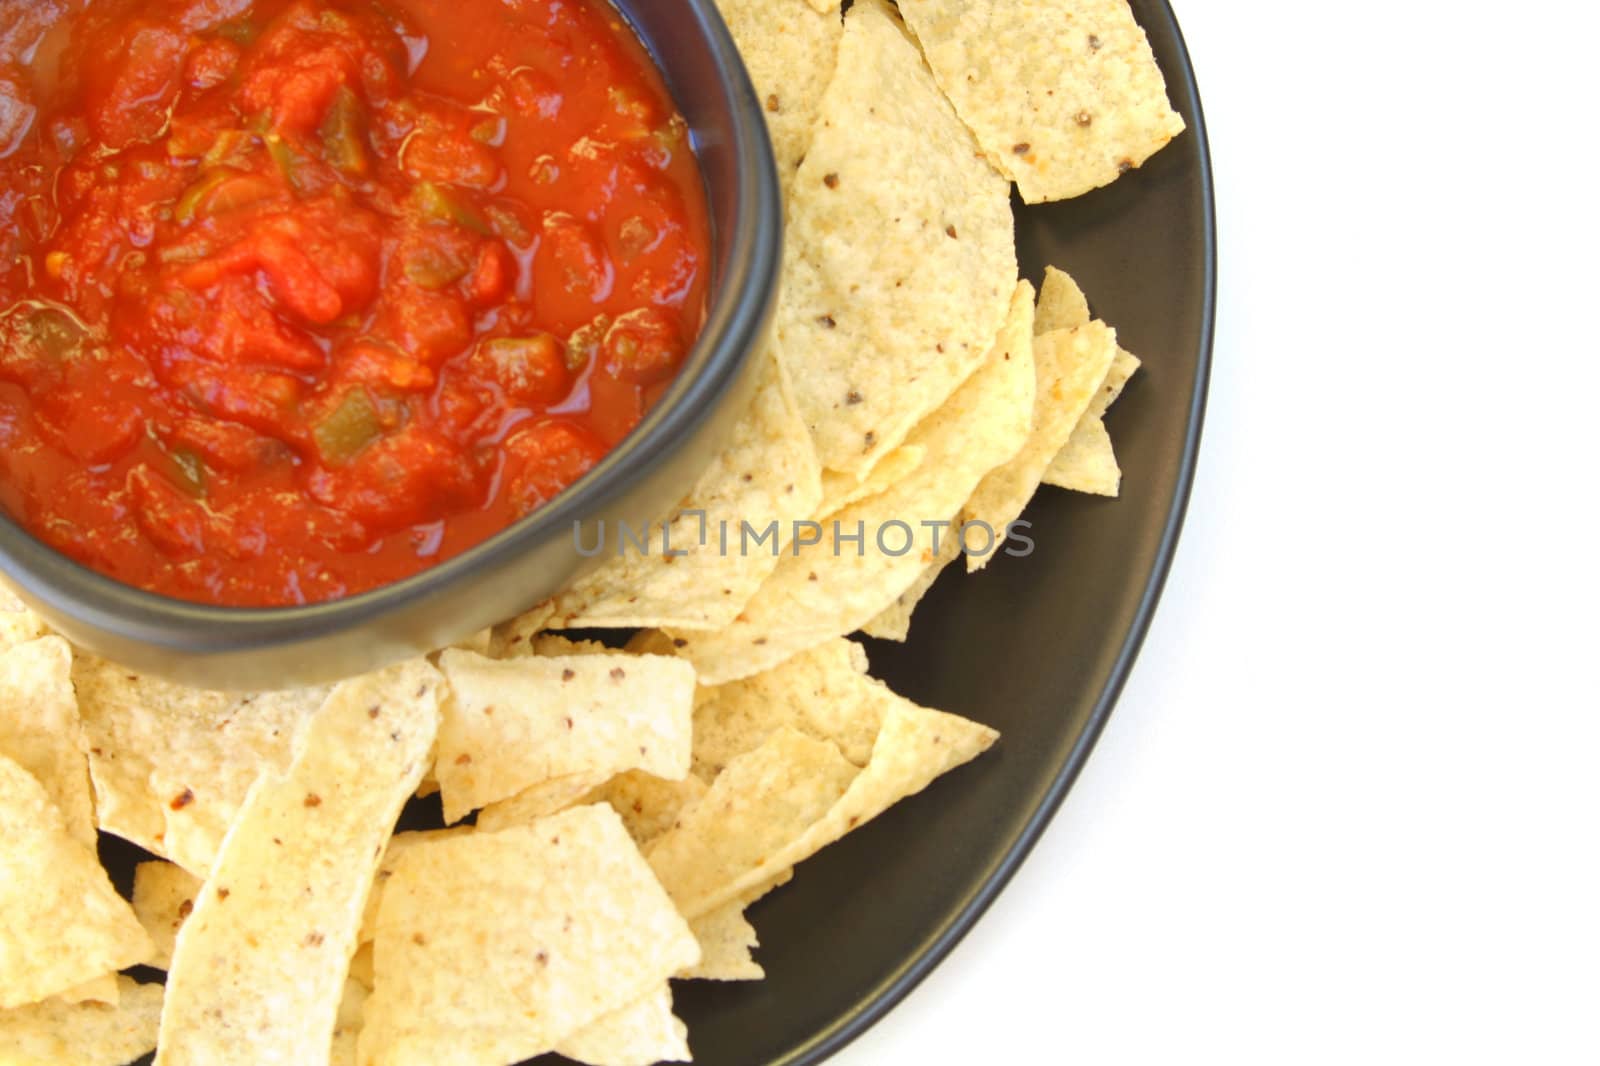 Salsa and chips isolated on a white background.